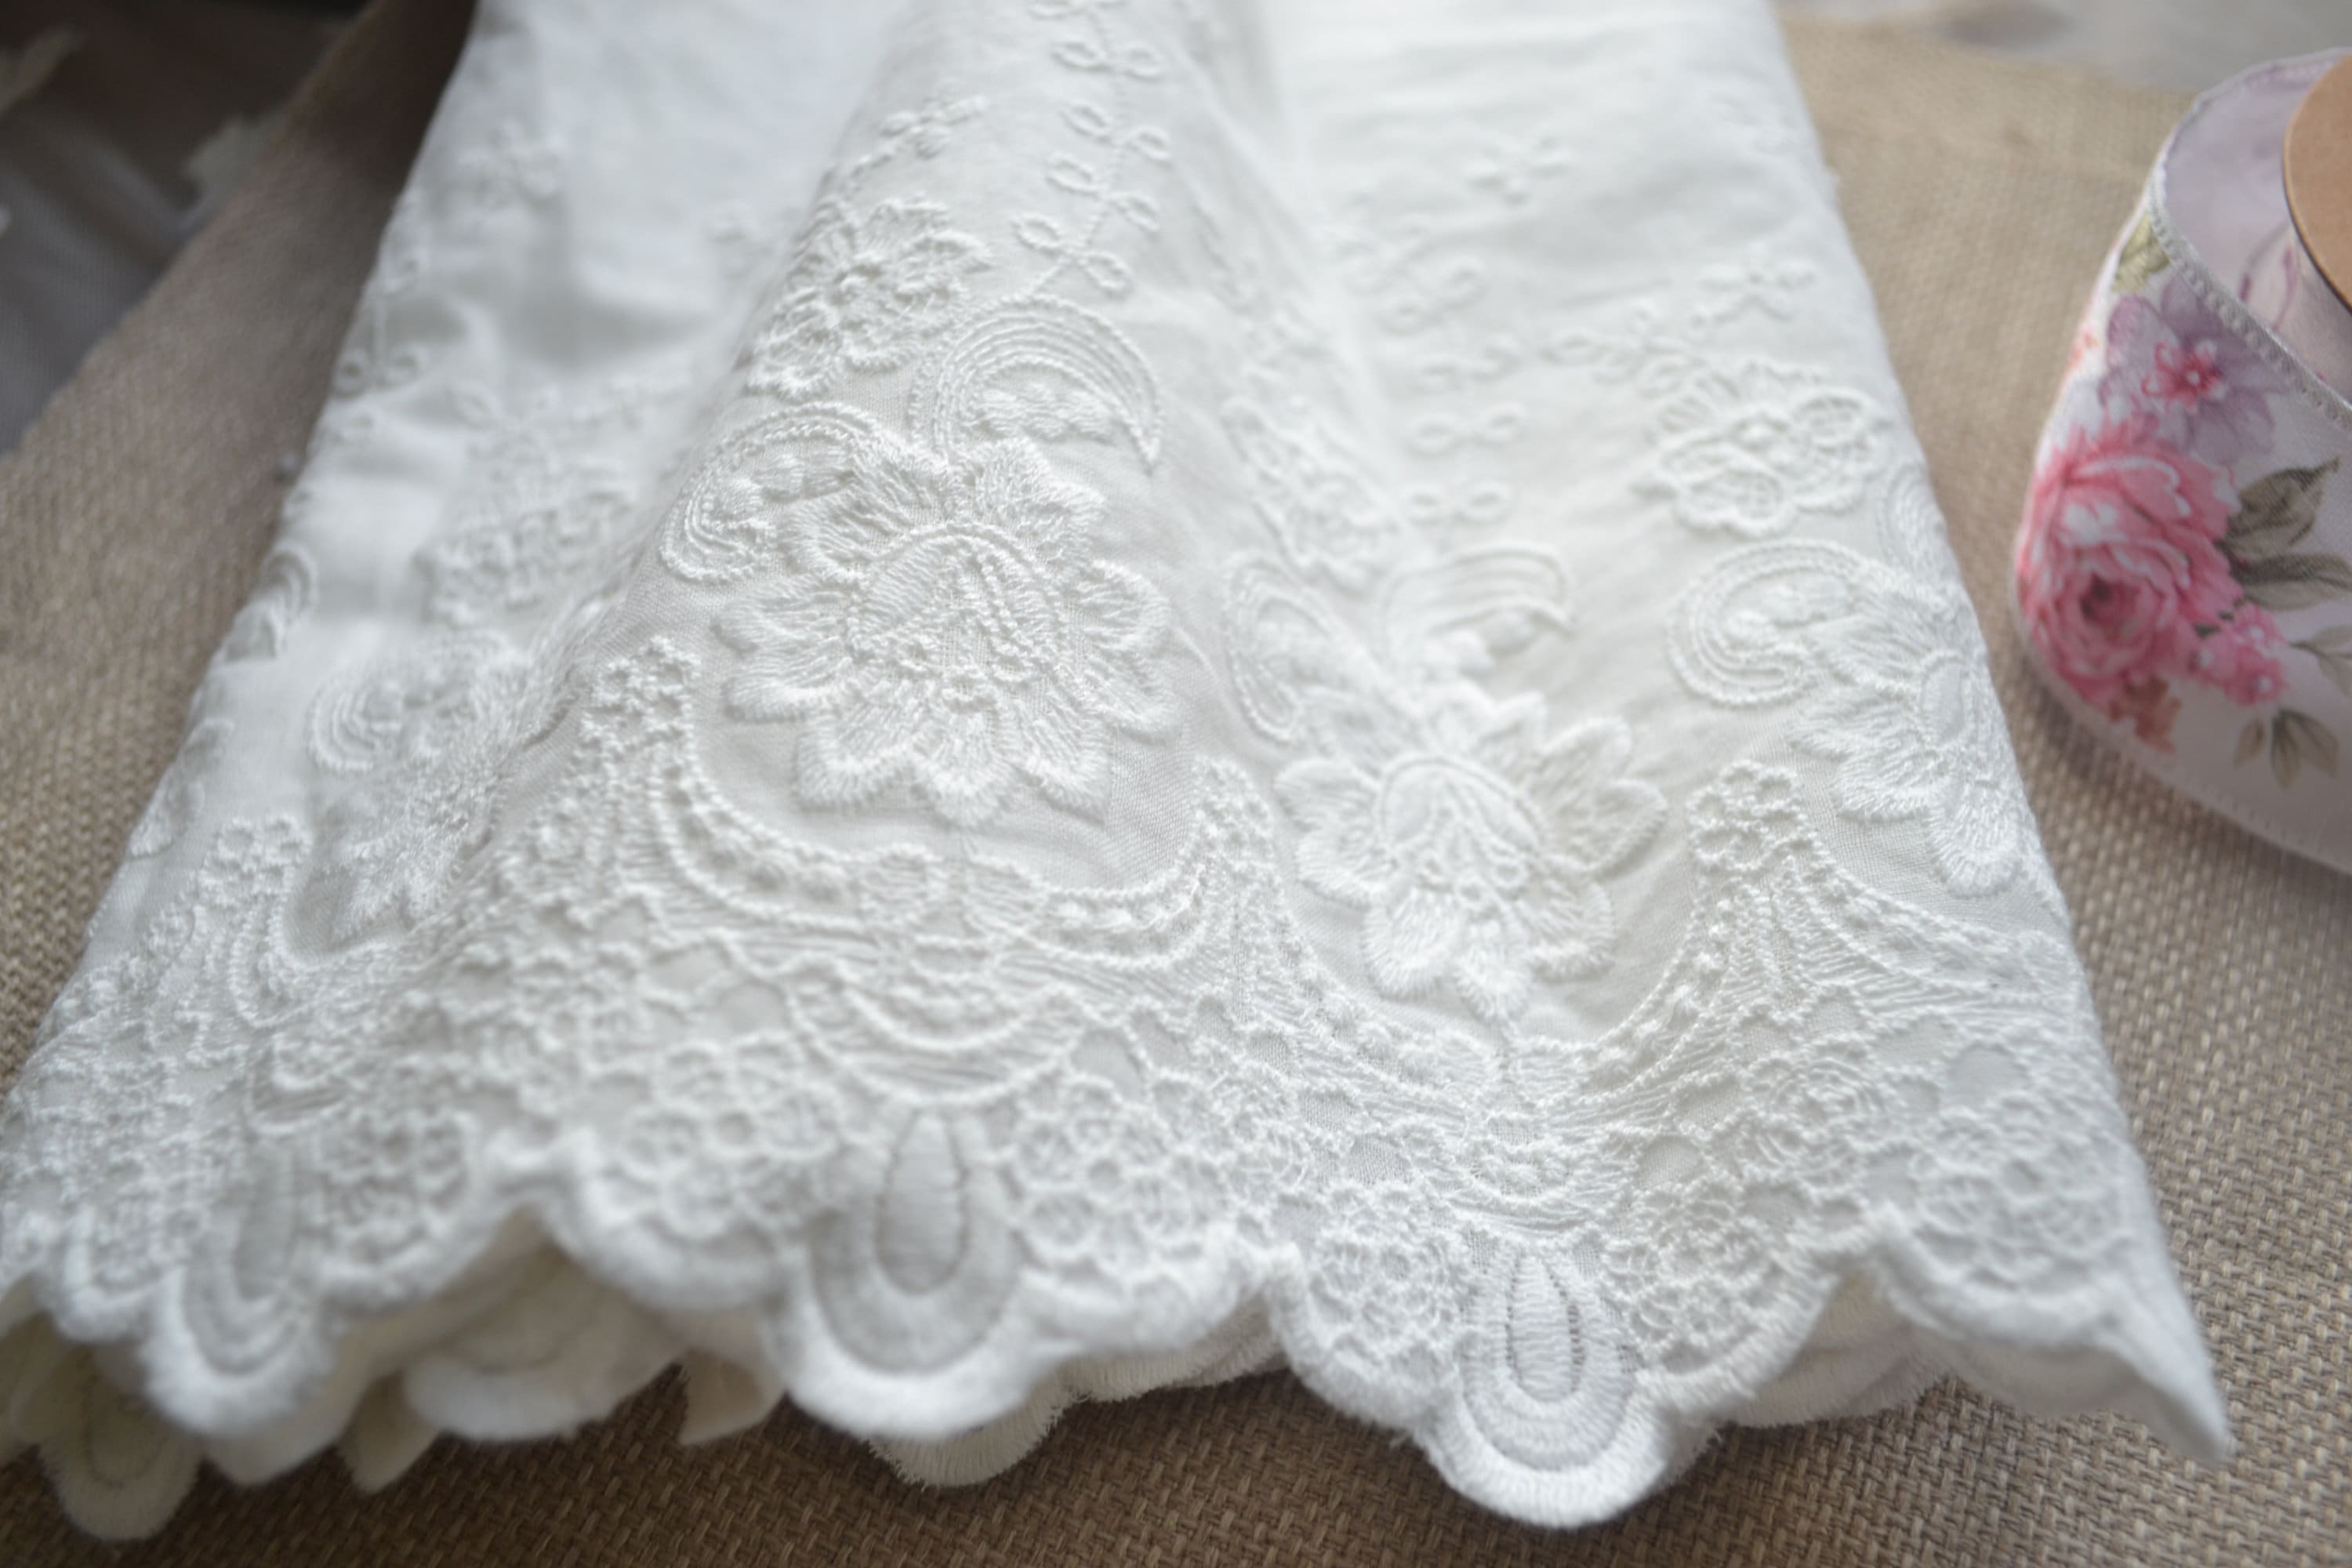 White Cotton Lace Fabric, Embroidered Lace Fabric, Wide Cotton Floral Lace  